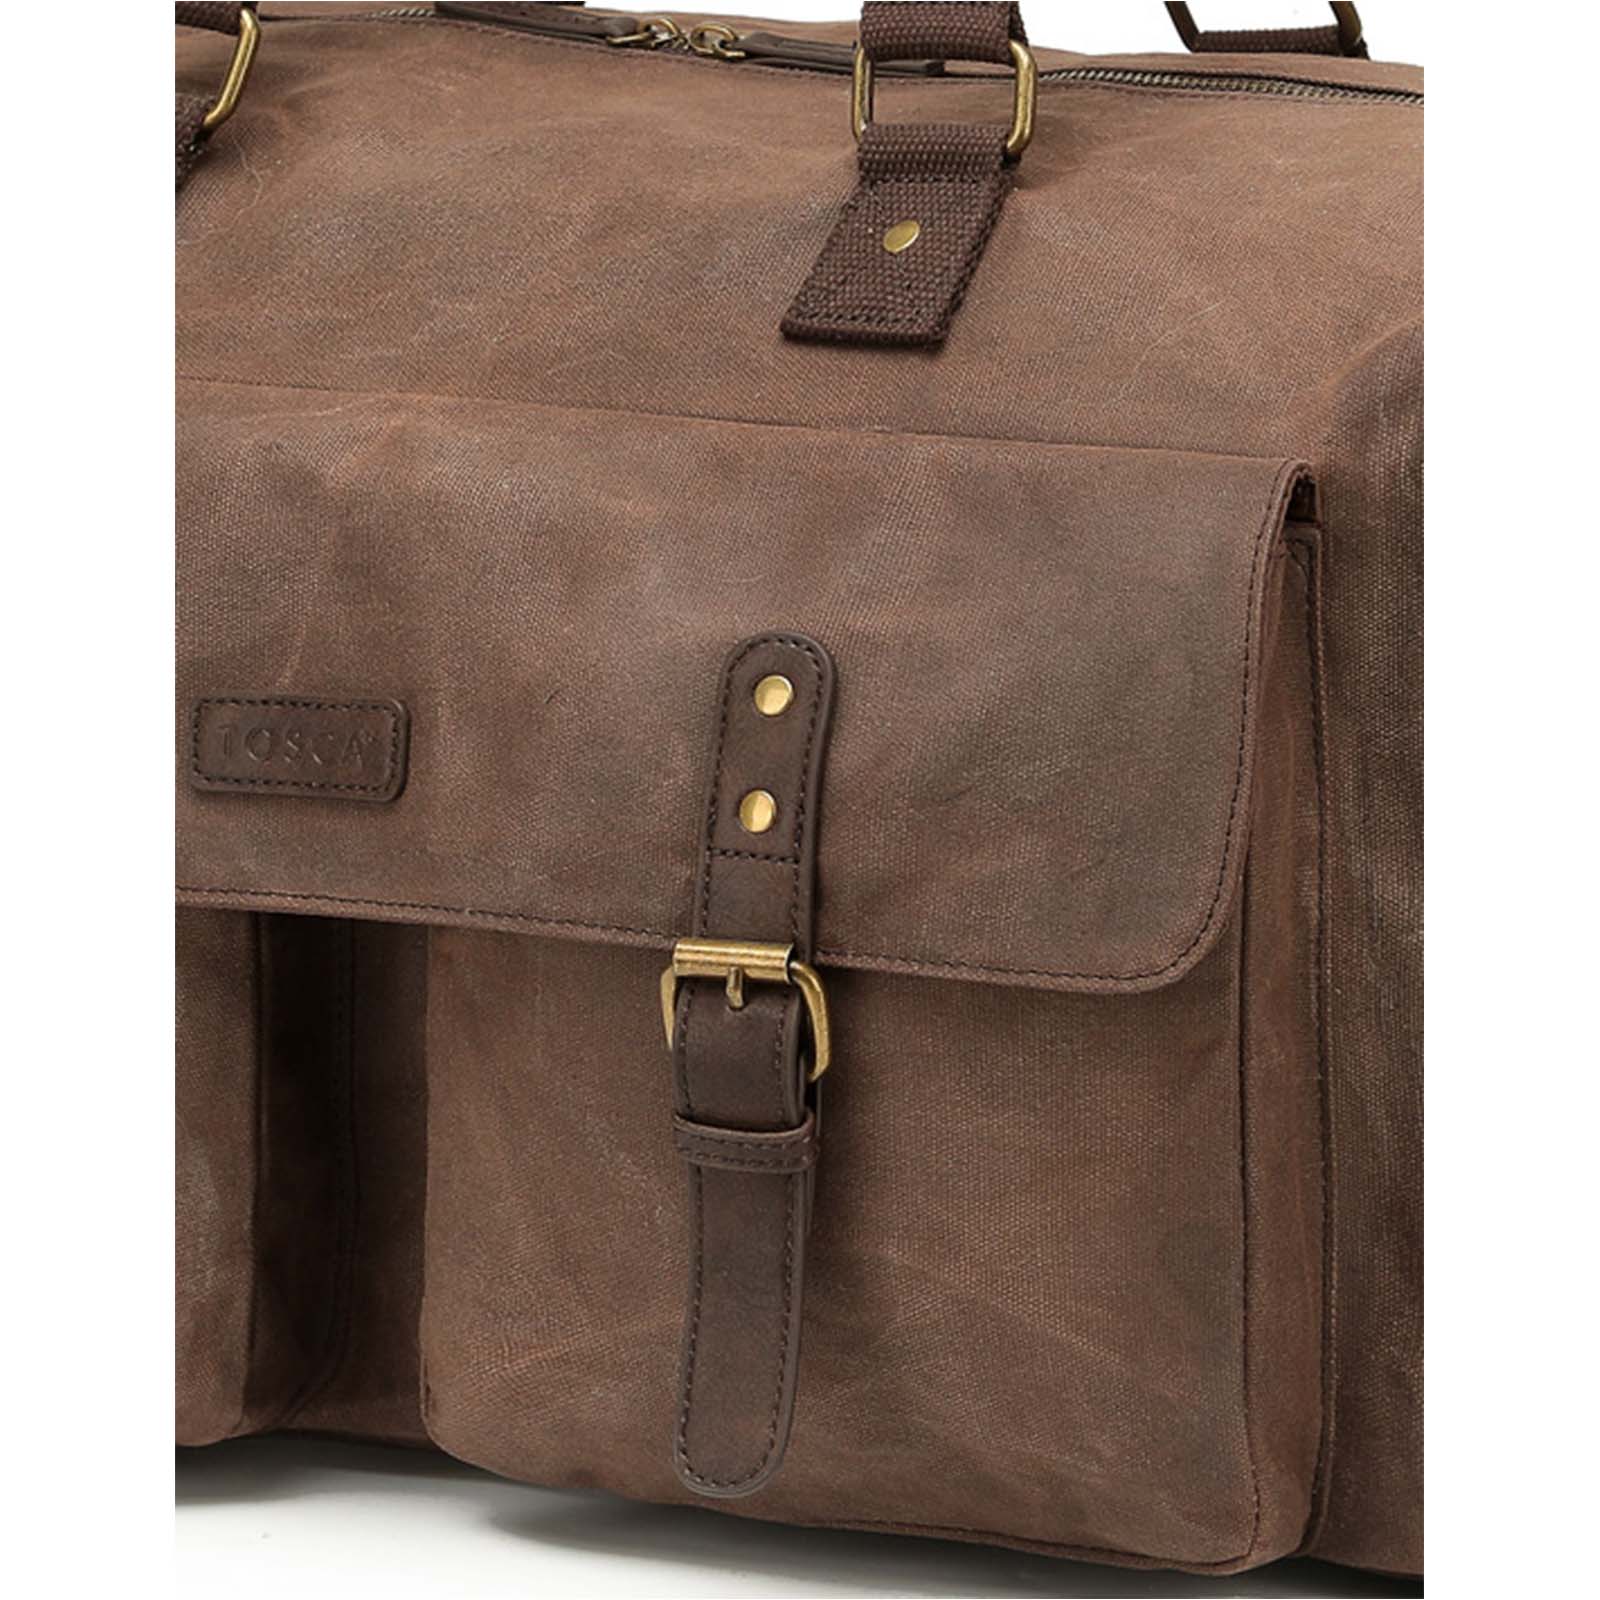 Tosca_Waxed_Canvas_Duffel_Bag_With_Pockets_Brown_Close.jpg